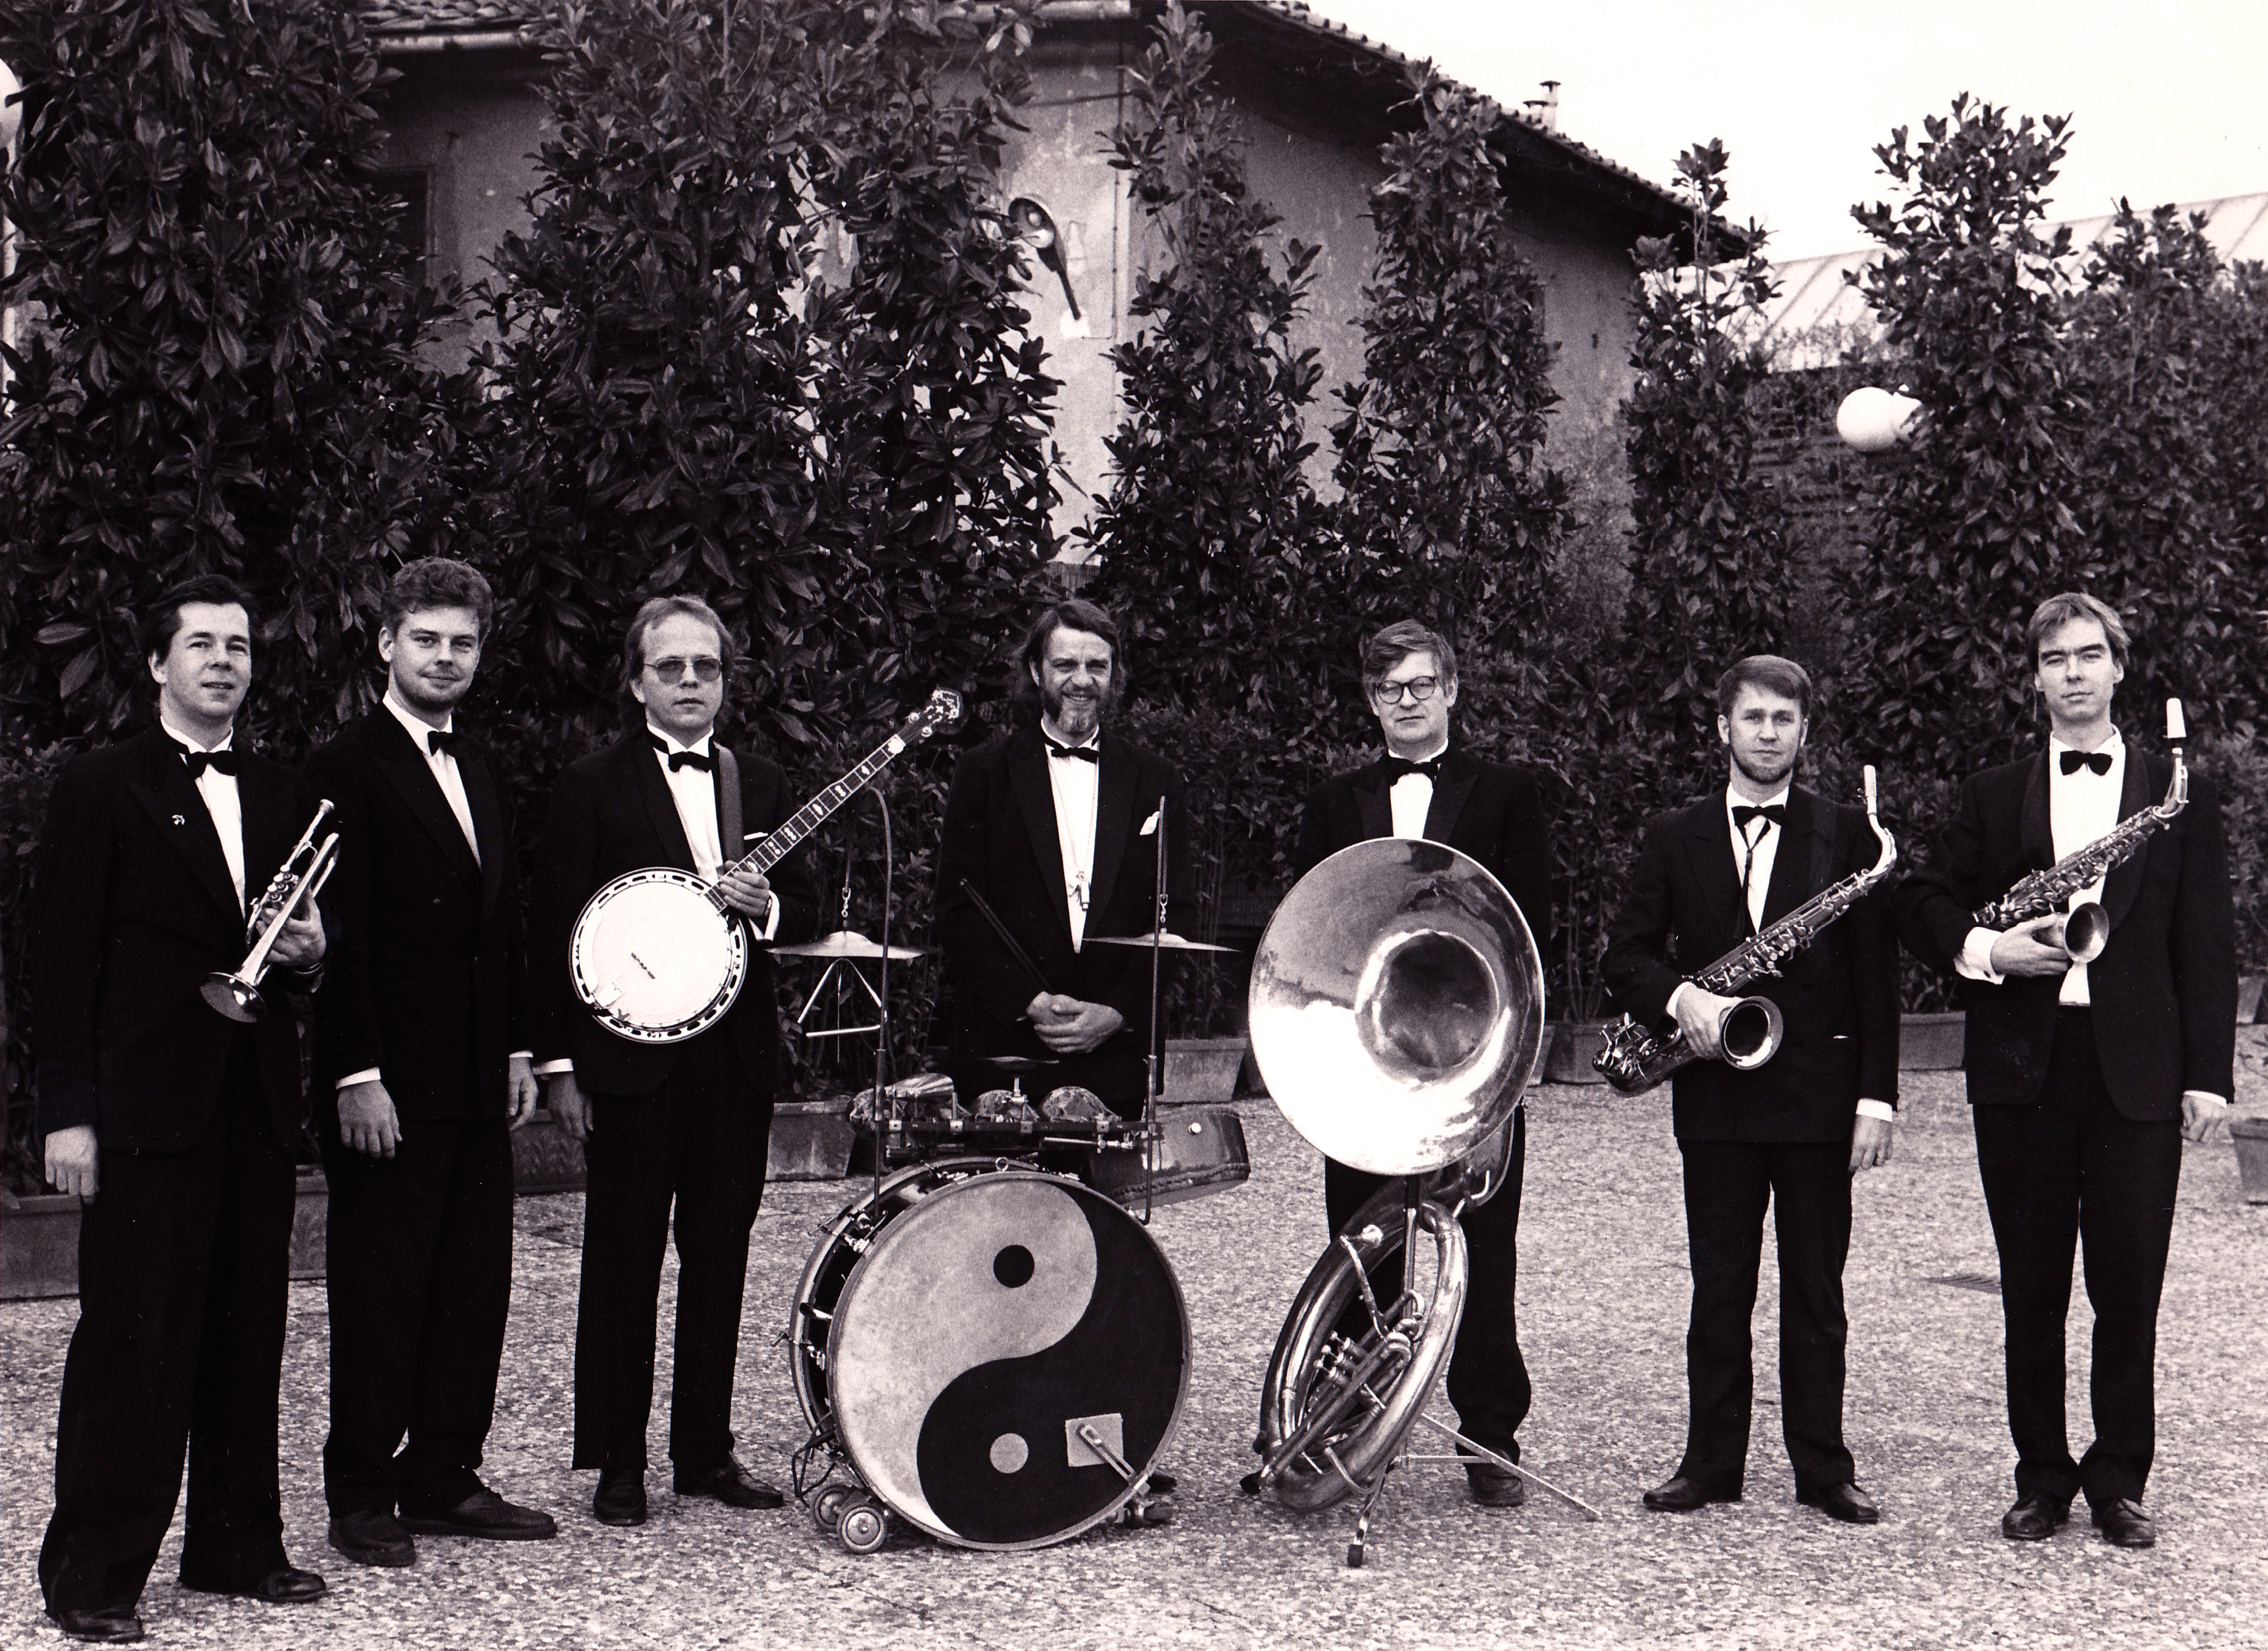 The Absalon Orchestra in Italy 1989